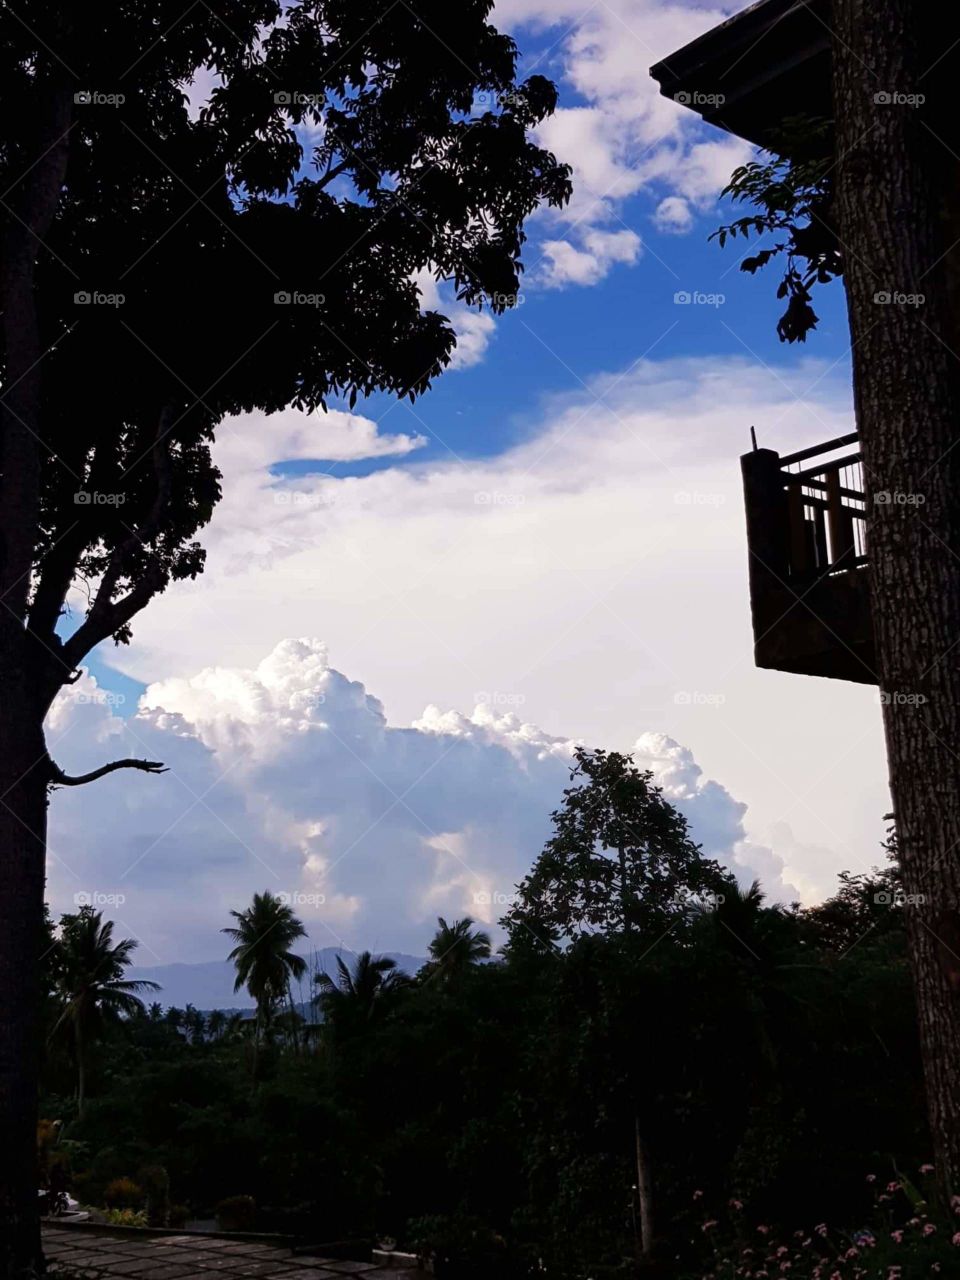 Silhouette of a part of a house, trees, and grass. Beautiful detailed clouds can be seen on the background.